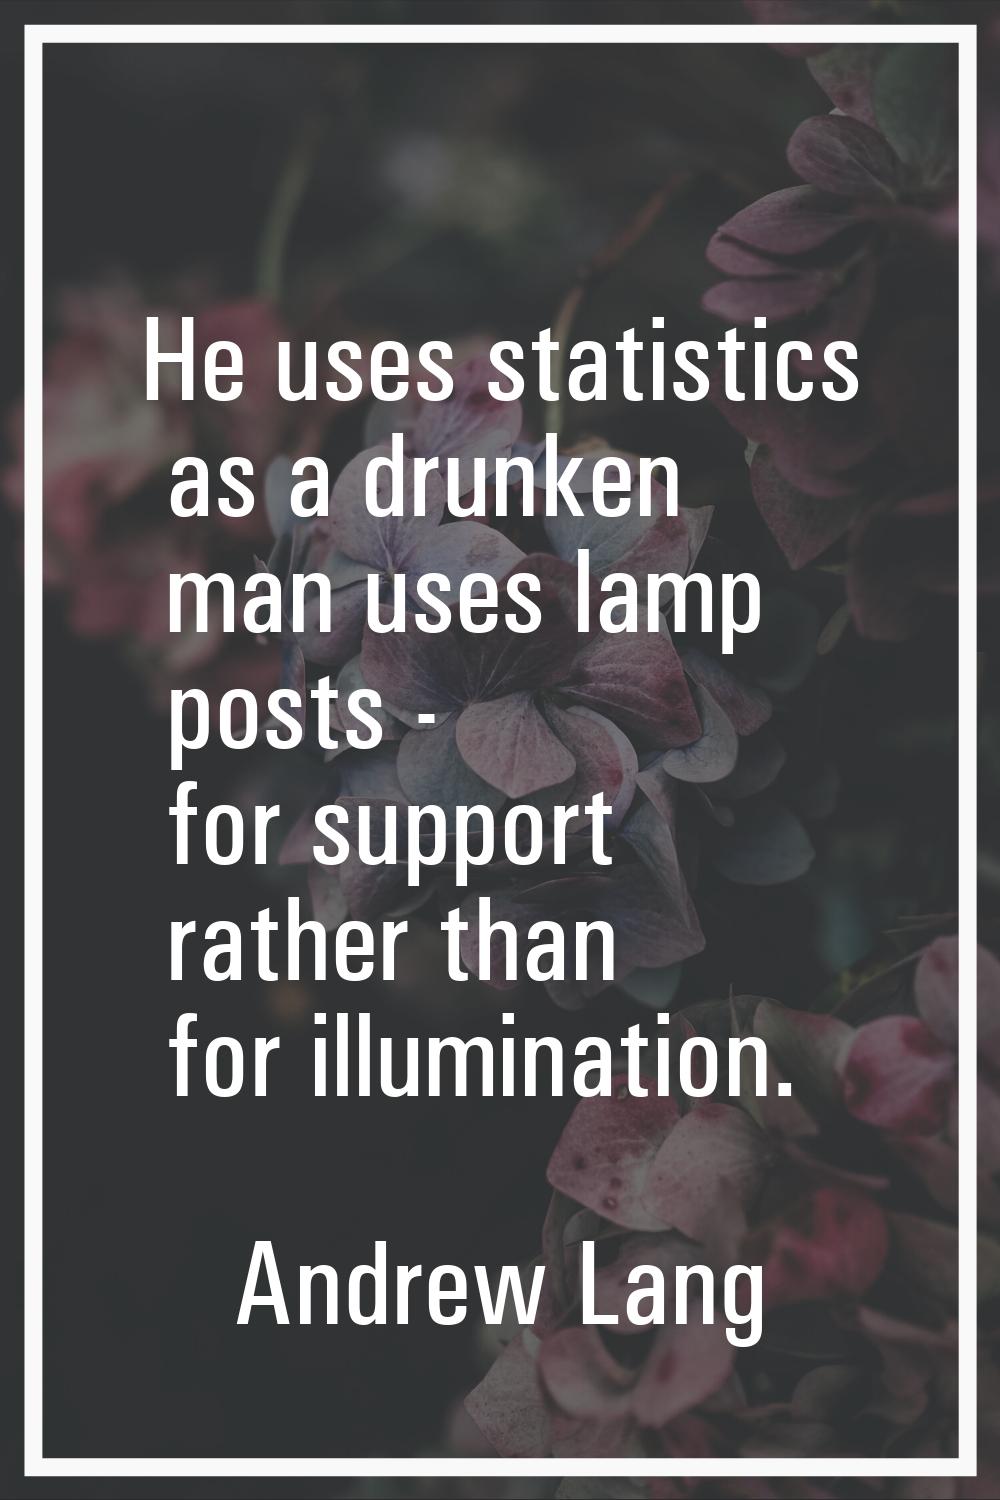 He uses statistics as a drunken man uses lamp posts - for support rather than for illumination.